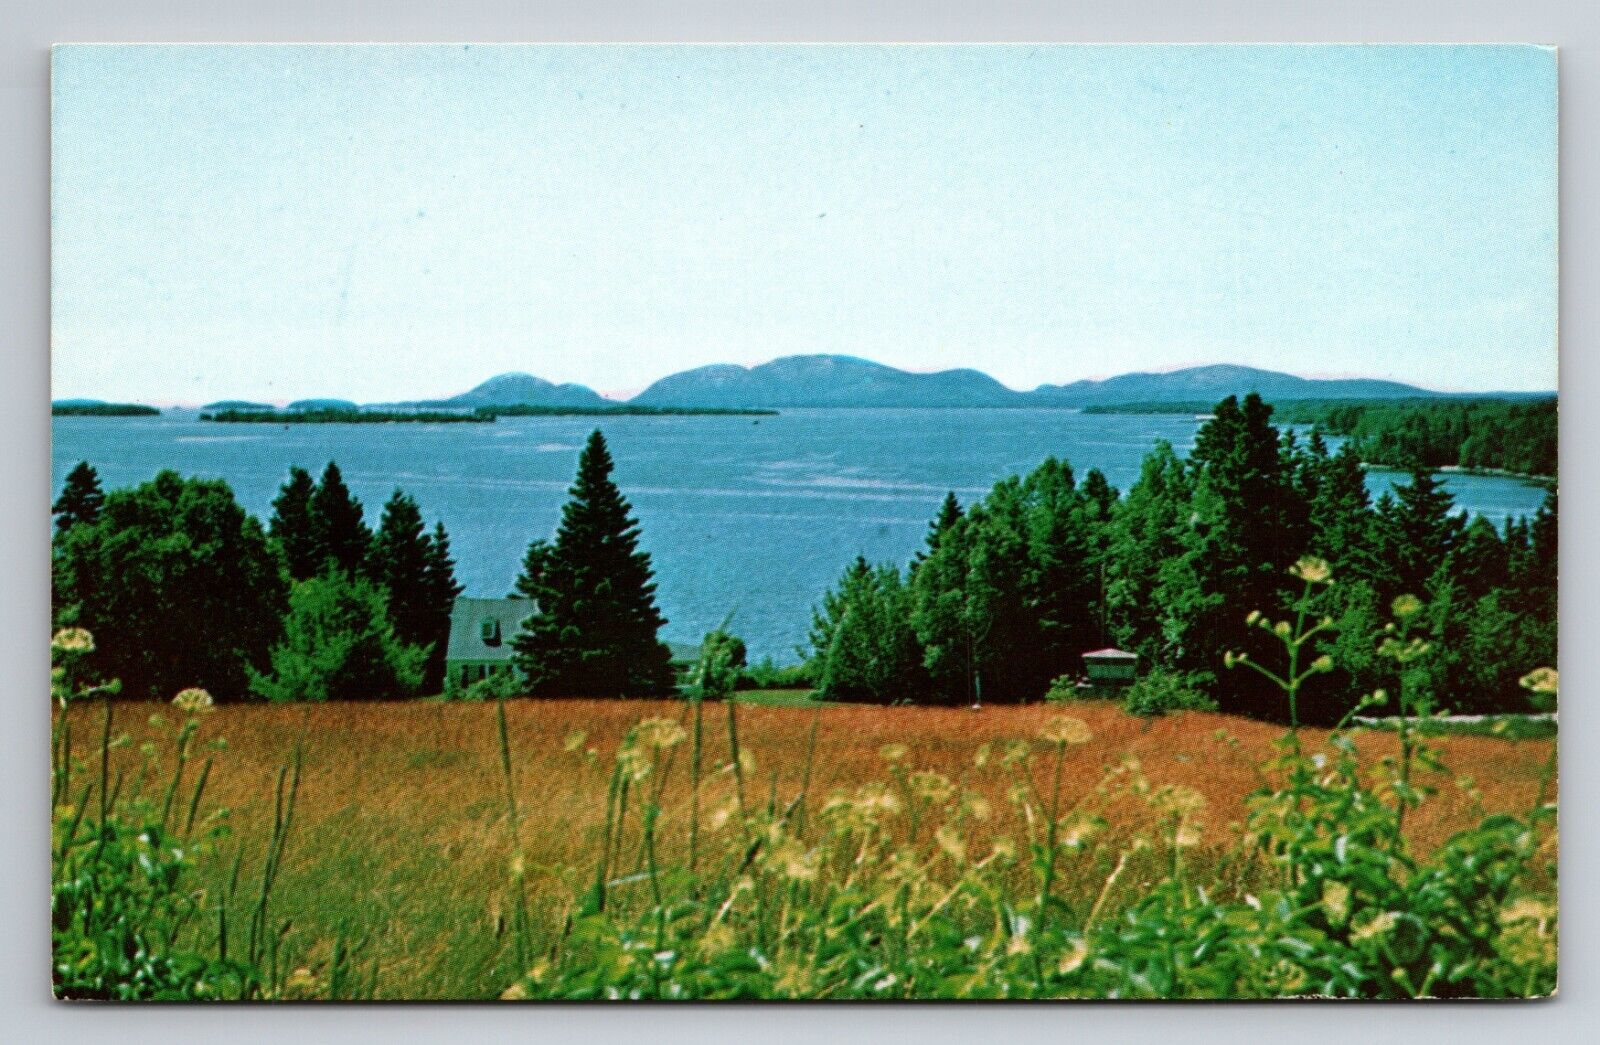 View At Sullivan Maine By U.S. Highway No. One Vintage Unposted Postcard